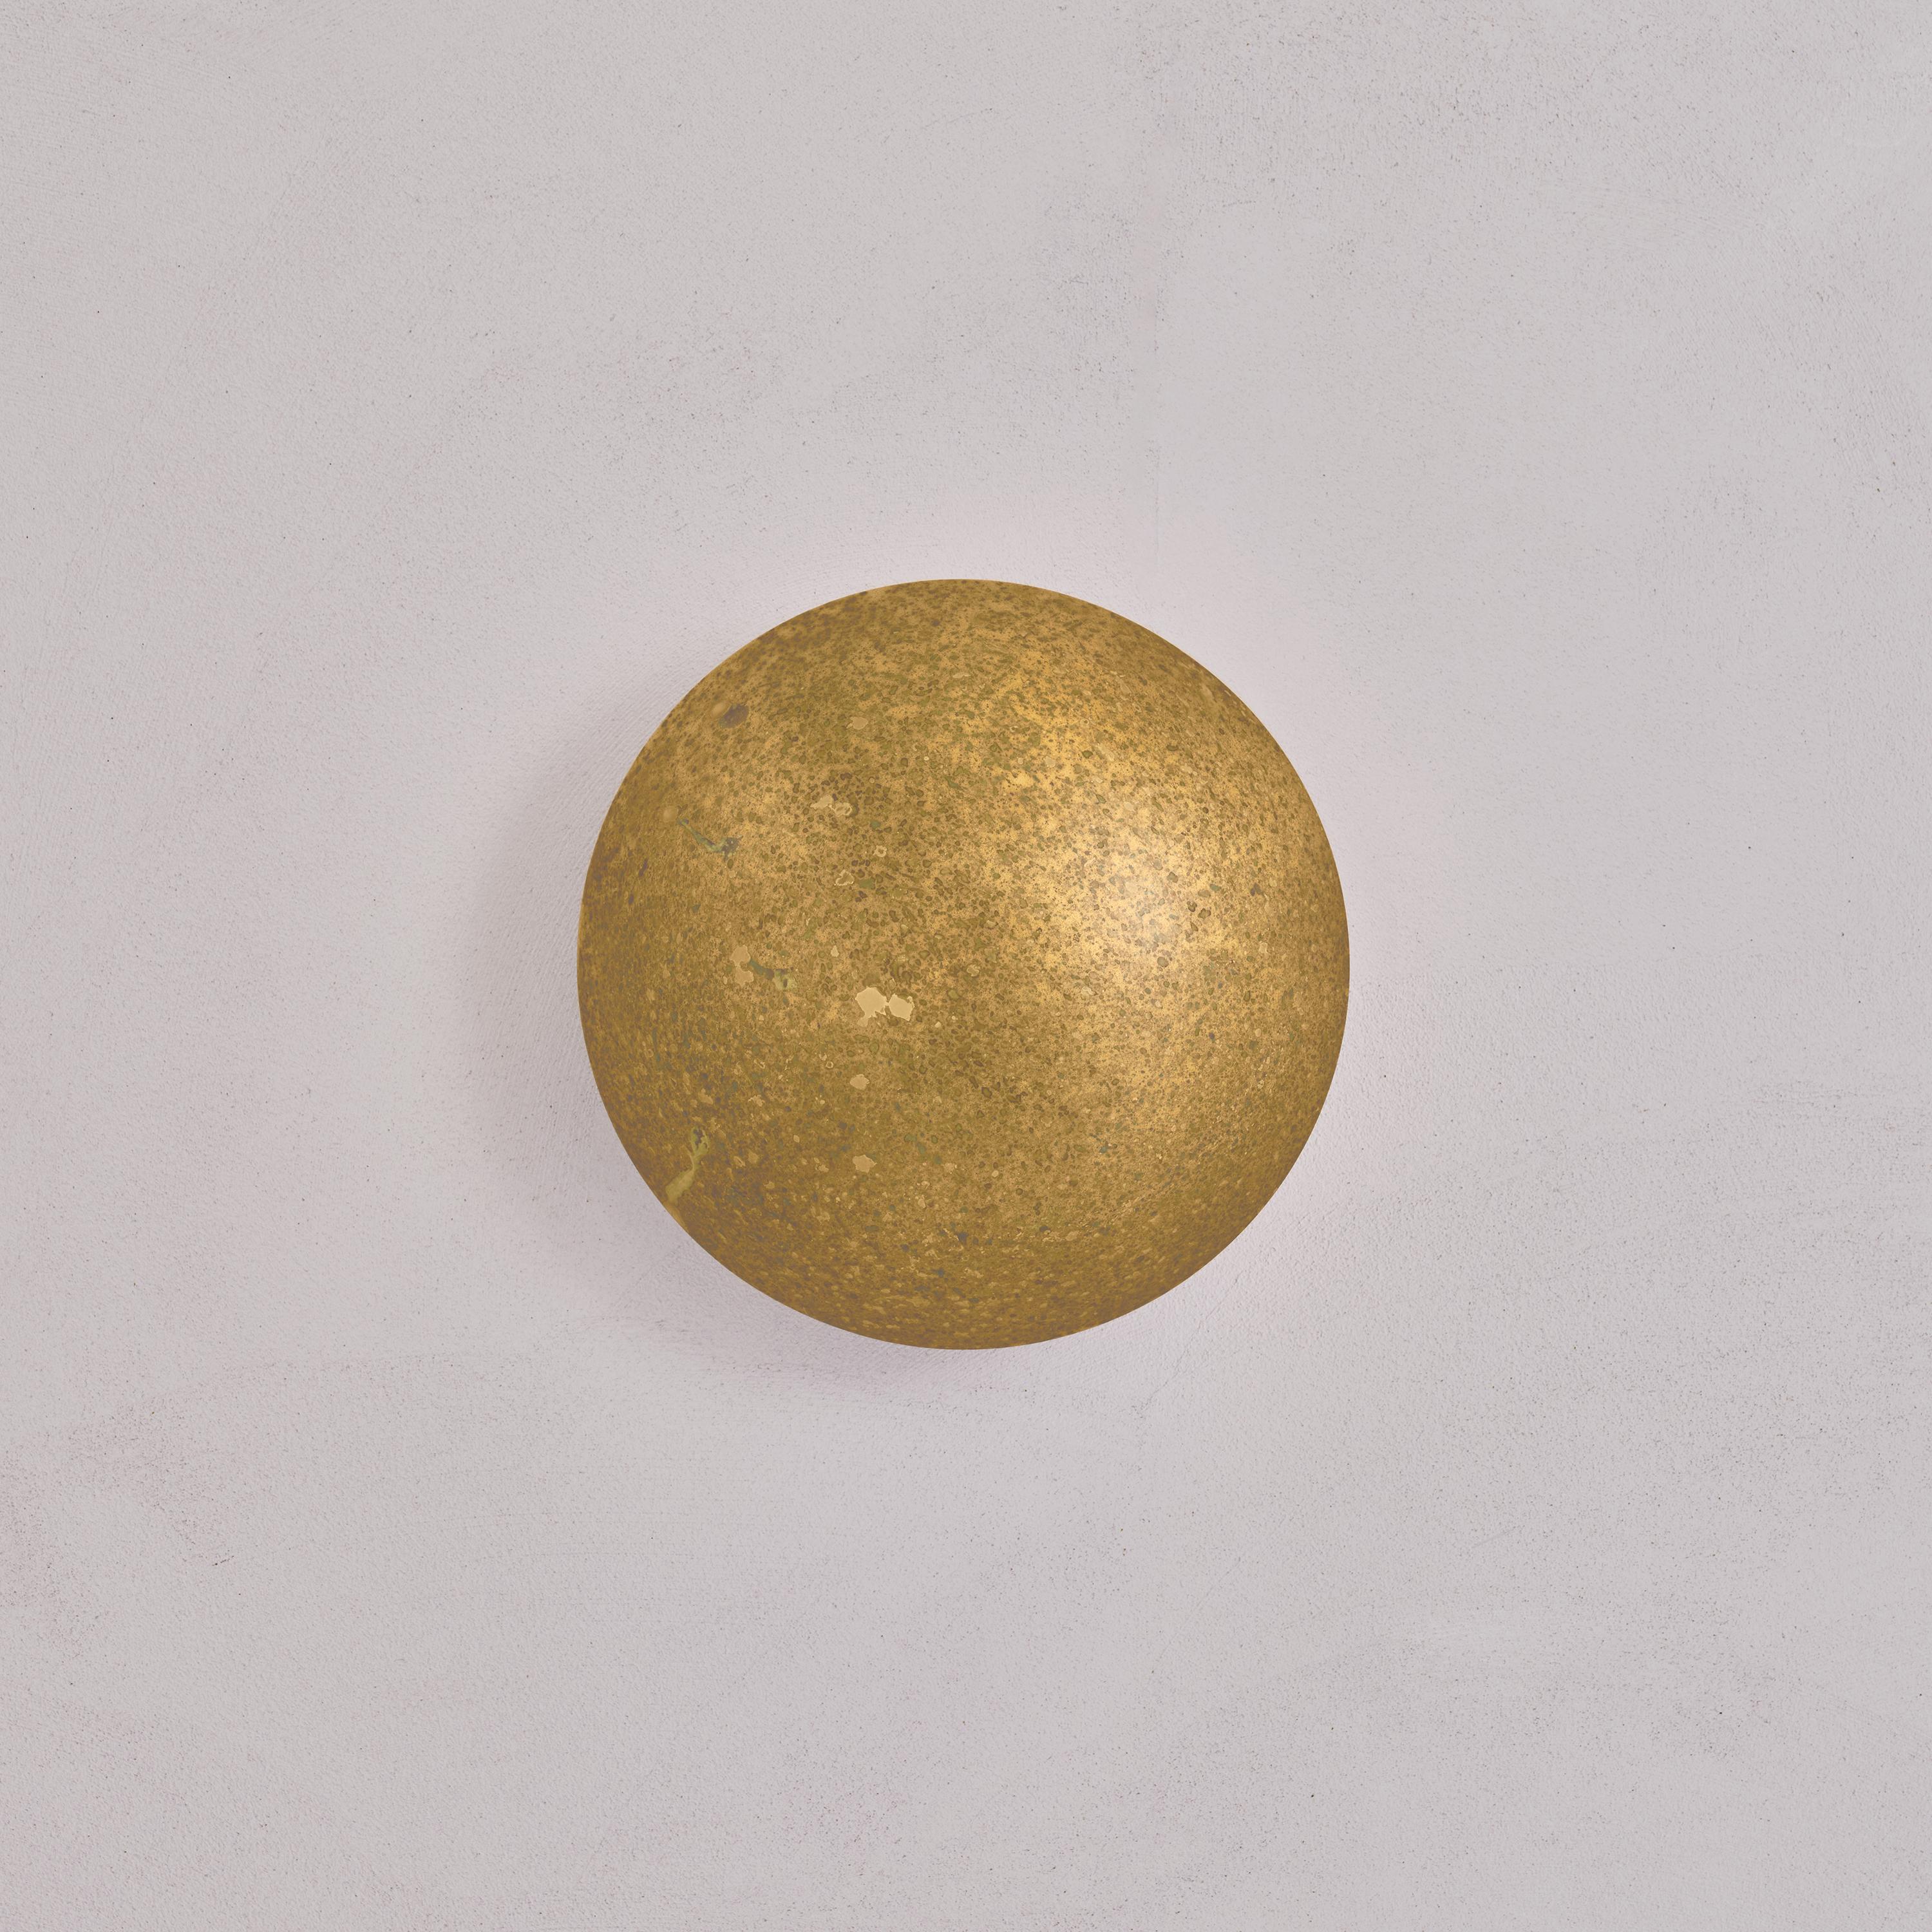 Organic Modern Cosmic 'Comet Oxidium 26' Hand-Crafted Oxidised Patinated Brass Wall Light For Sale